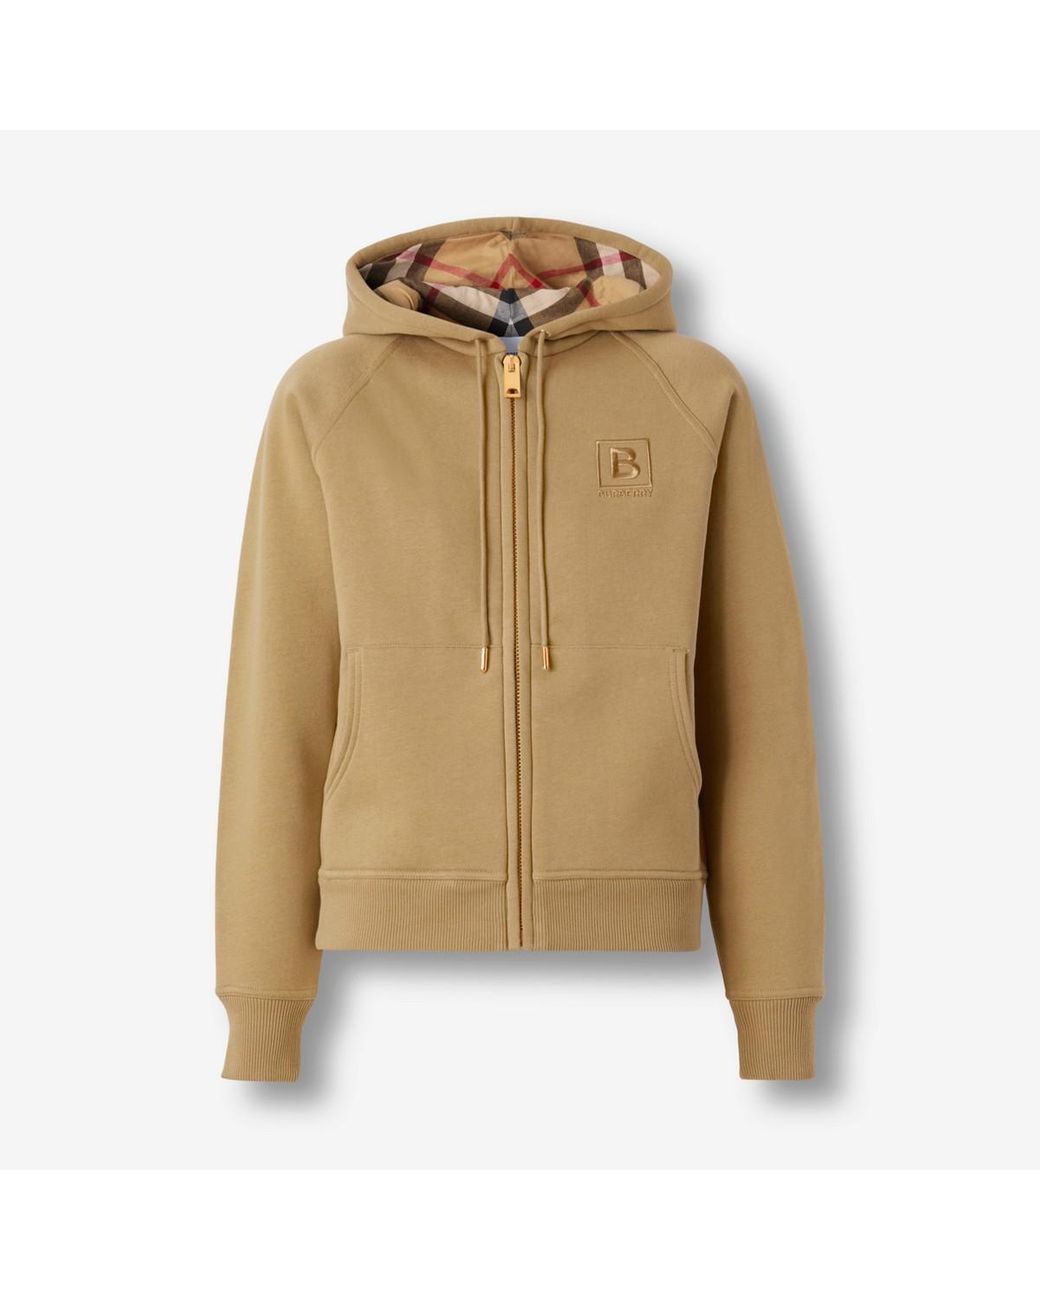 Burberry Letter Graphic Cotton Blend Zip Hoodie | Lyst